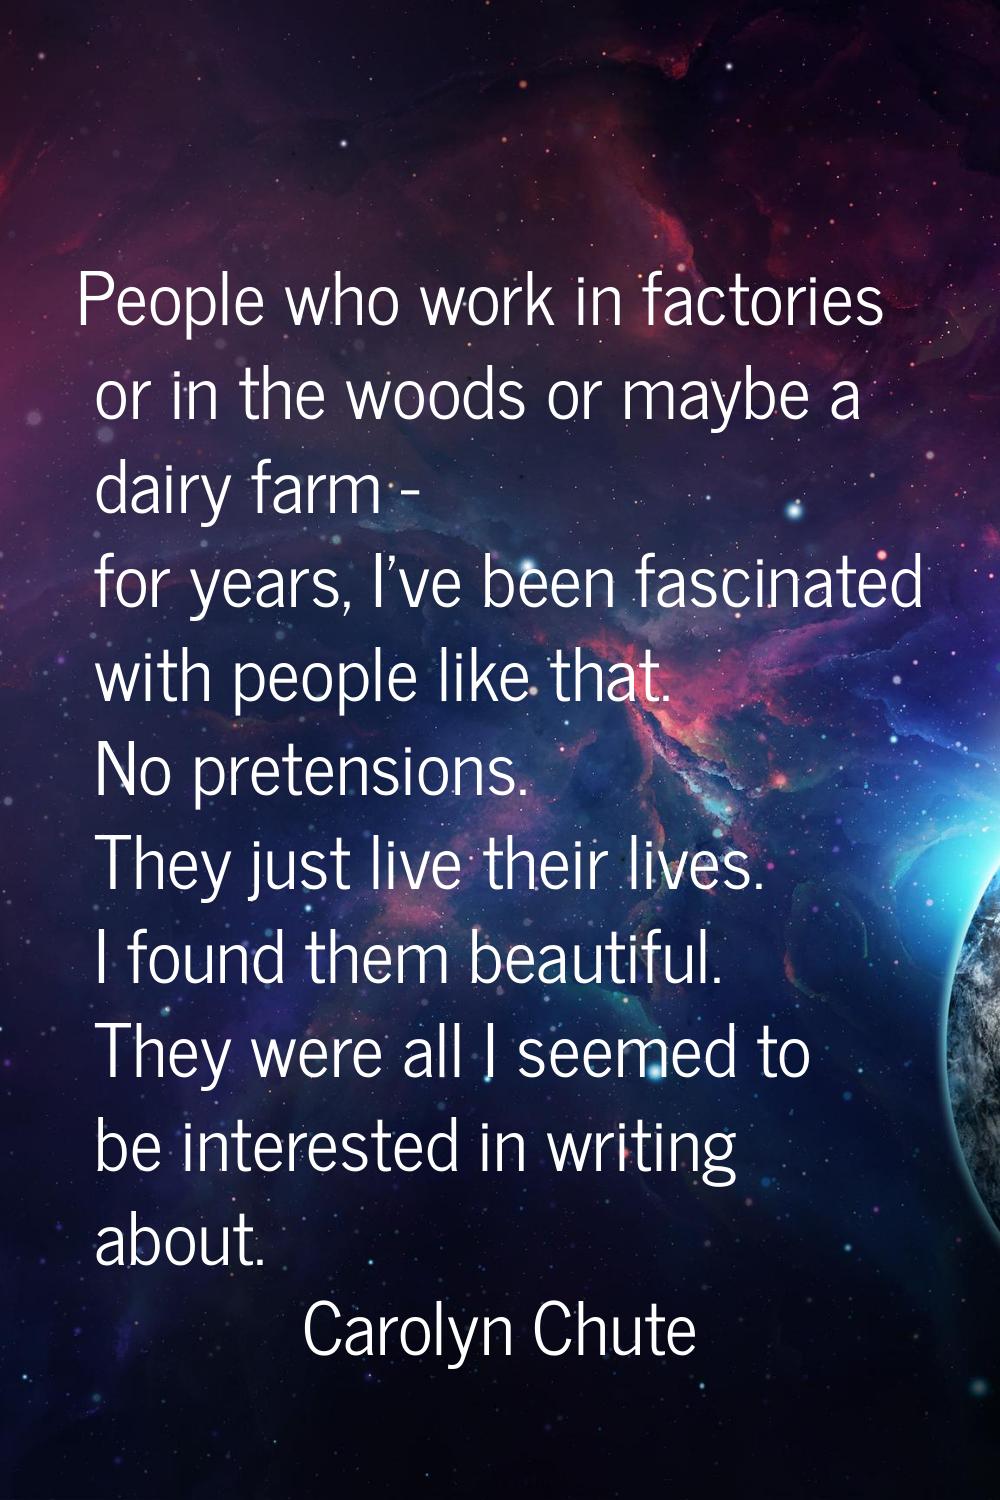 People who work in factories or in the woods or maybe a dairy farm - for years, I've been fascinate